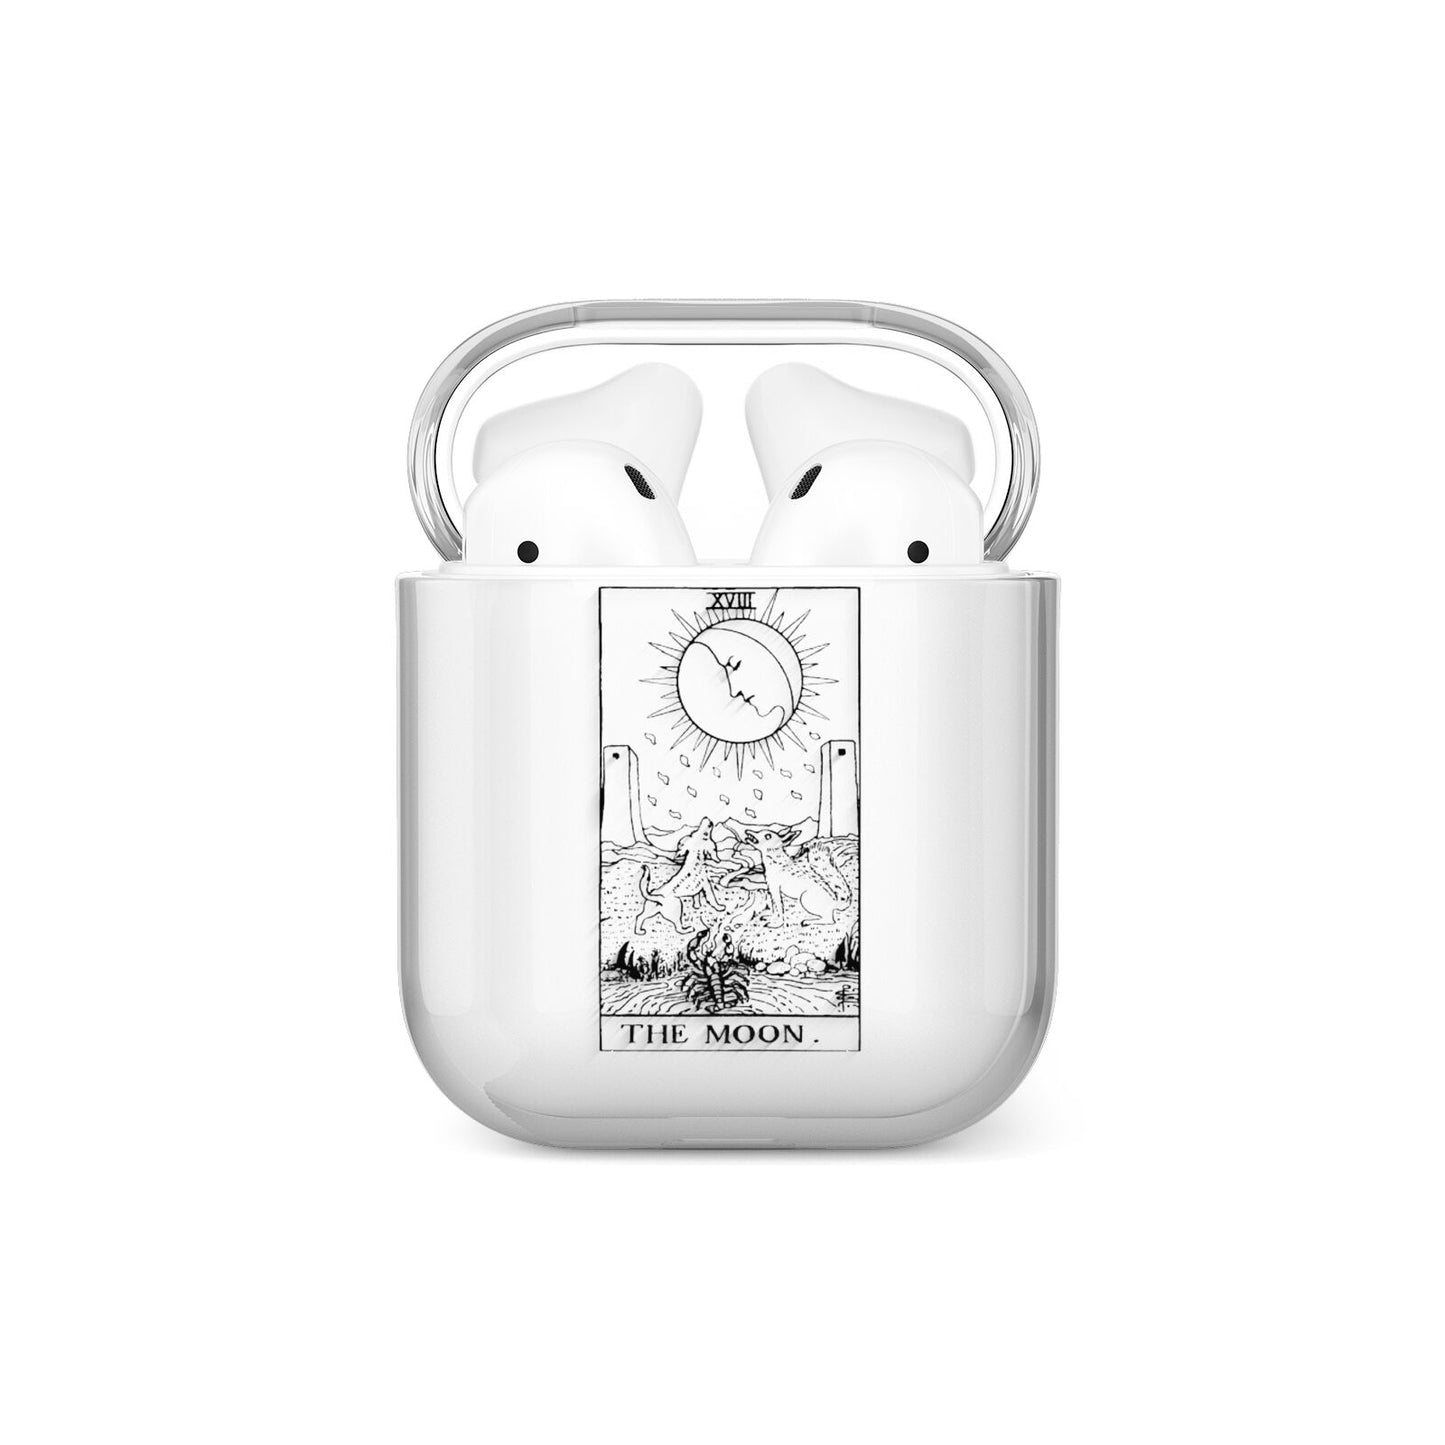 The Moon Monochrome AirPods Case